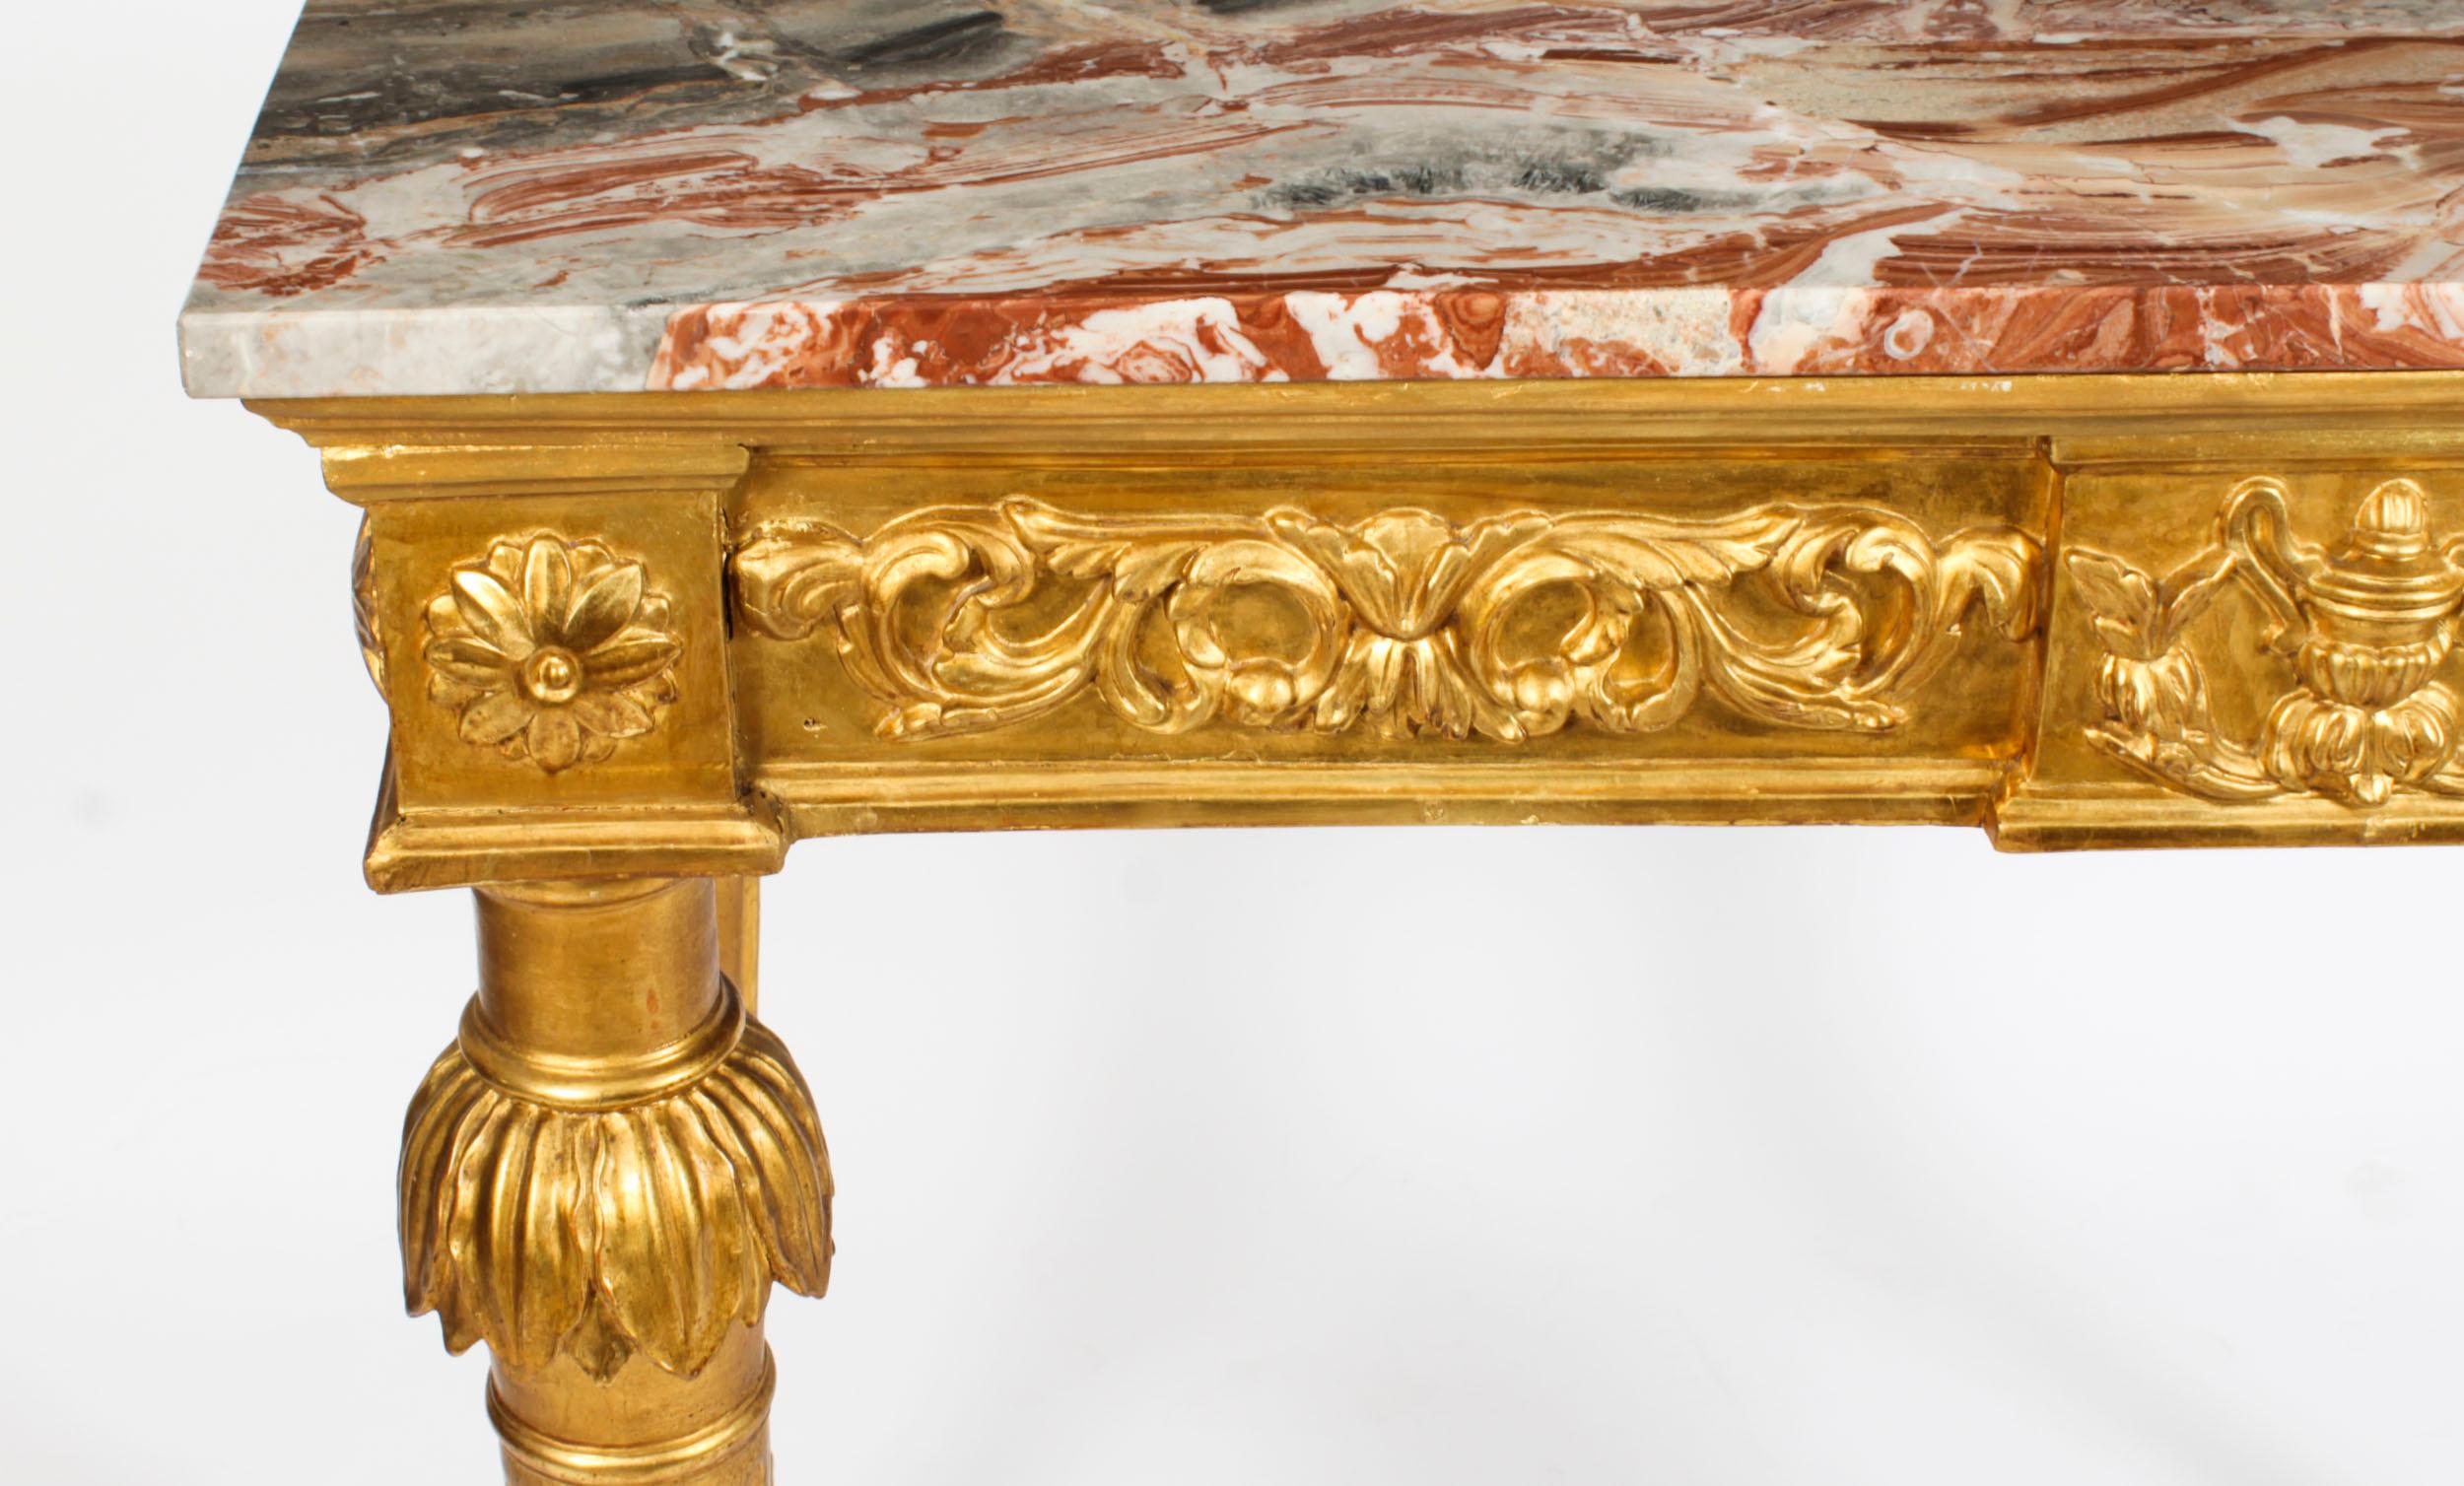 Antique Louis XV Revival Carved Giltwood Console Pier Table, 19th Century For Sale 3